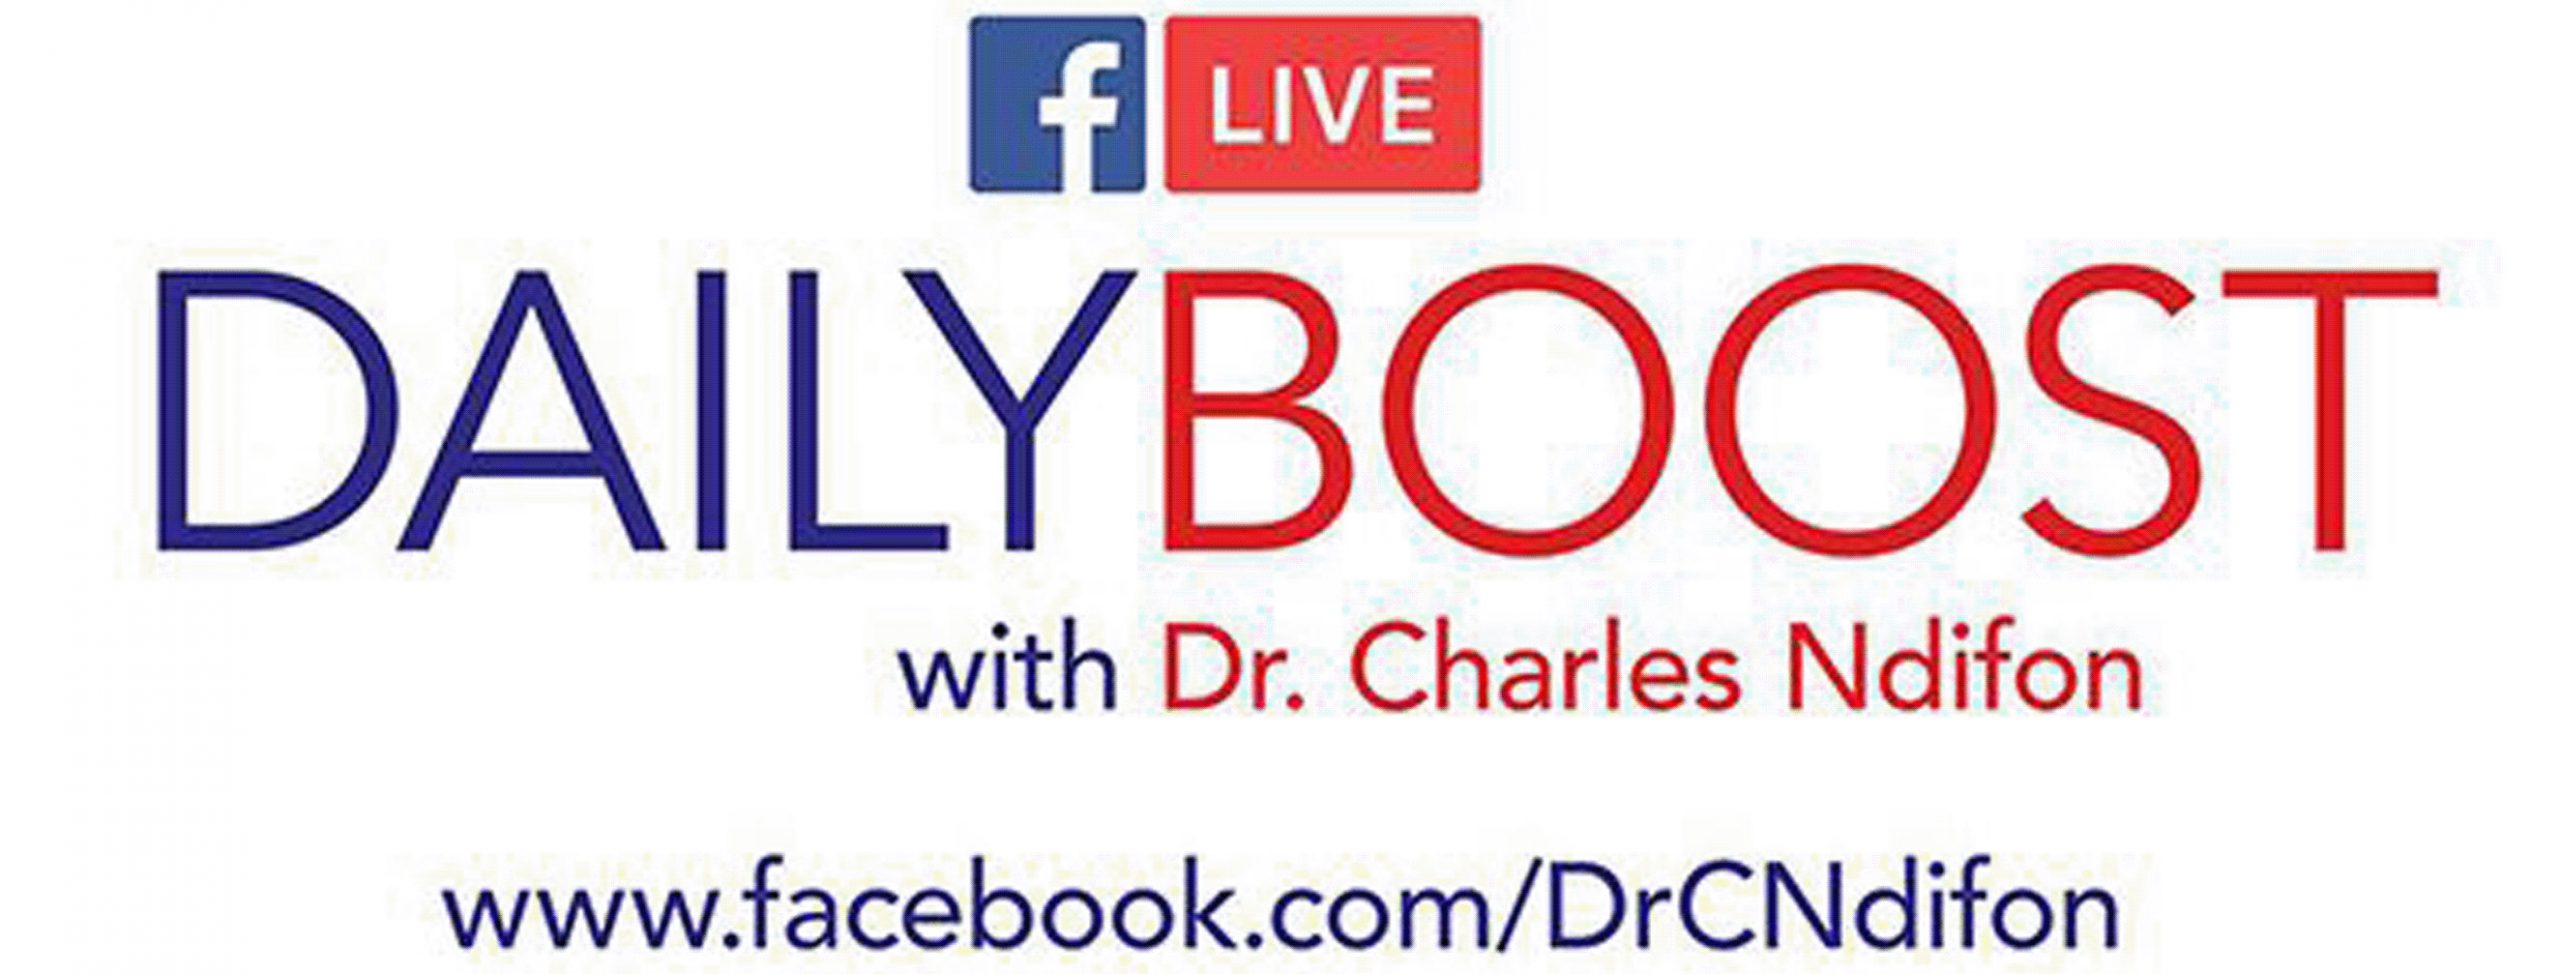 Daily Boost Logo, Your Daily Dose with Dr.Charles Ndifon airs 5 days a week on Facebook and YouTube live